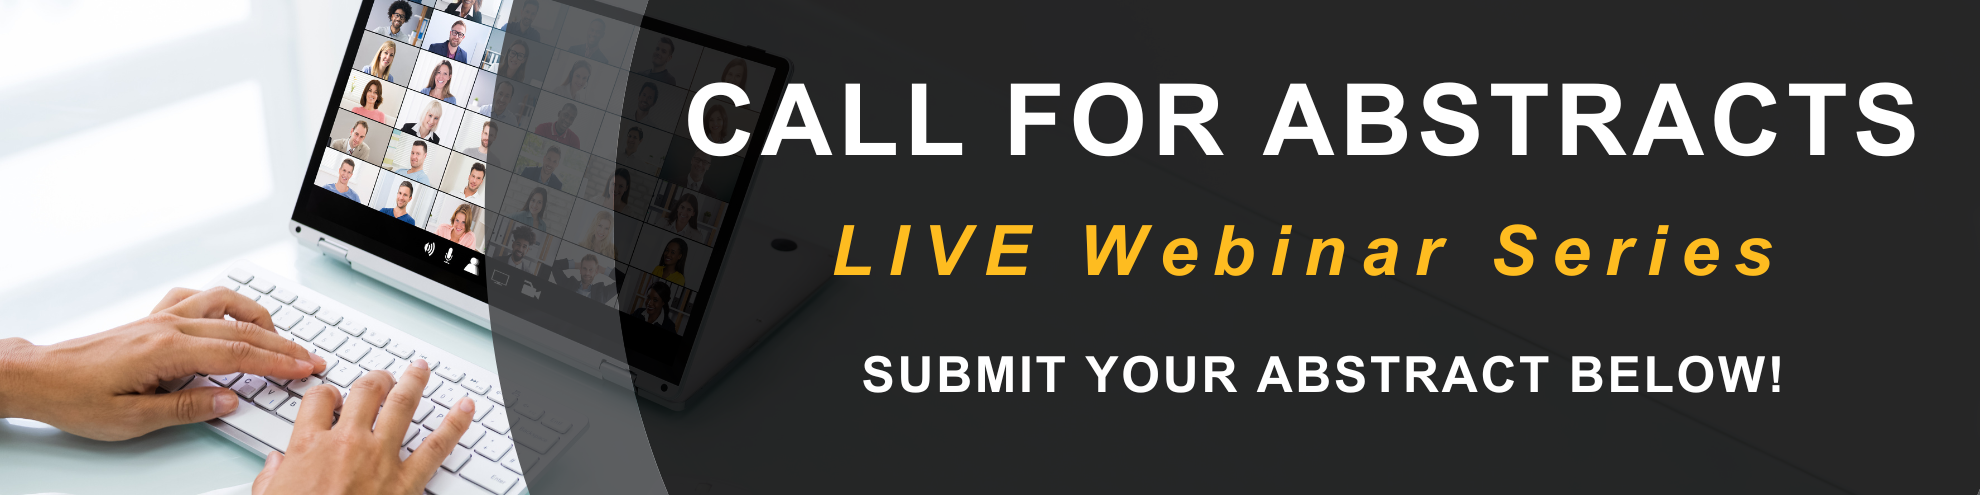 Call for Abstracts for our LIVE Webinar Series.